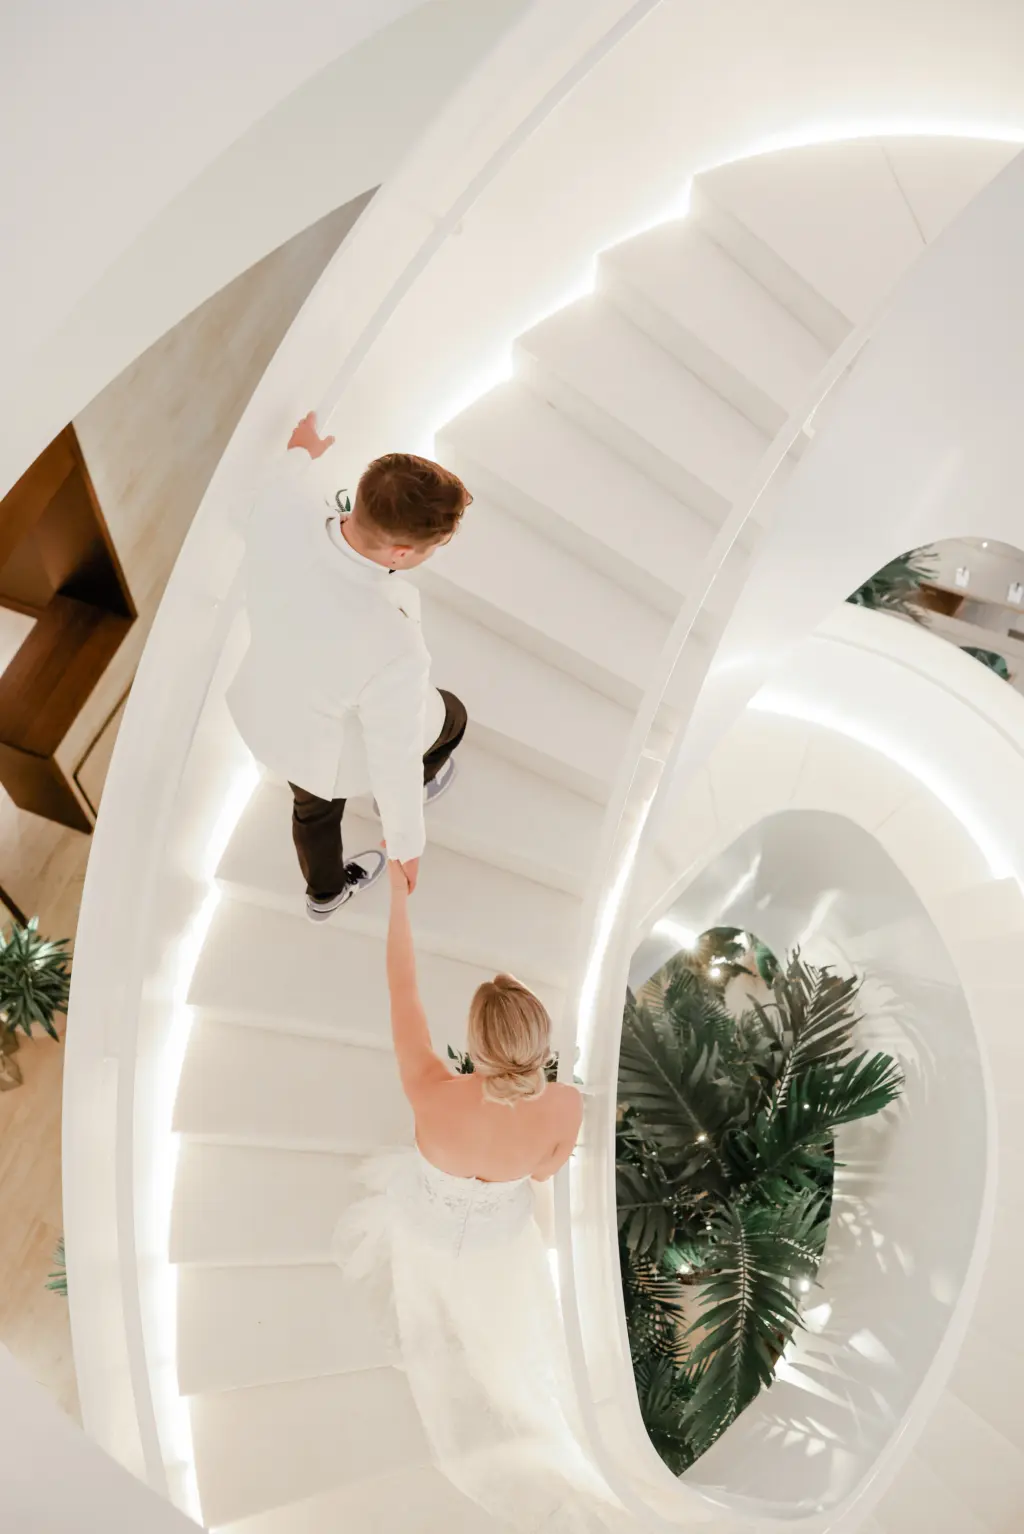 Bride and Groom Walking Up the Stairs | Tampa Bay Wedding Photographer Lifelong Photography | Downtown Event Venue The Edition Hotel Tampa Water Street Lobby Staircase